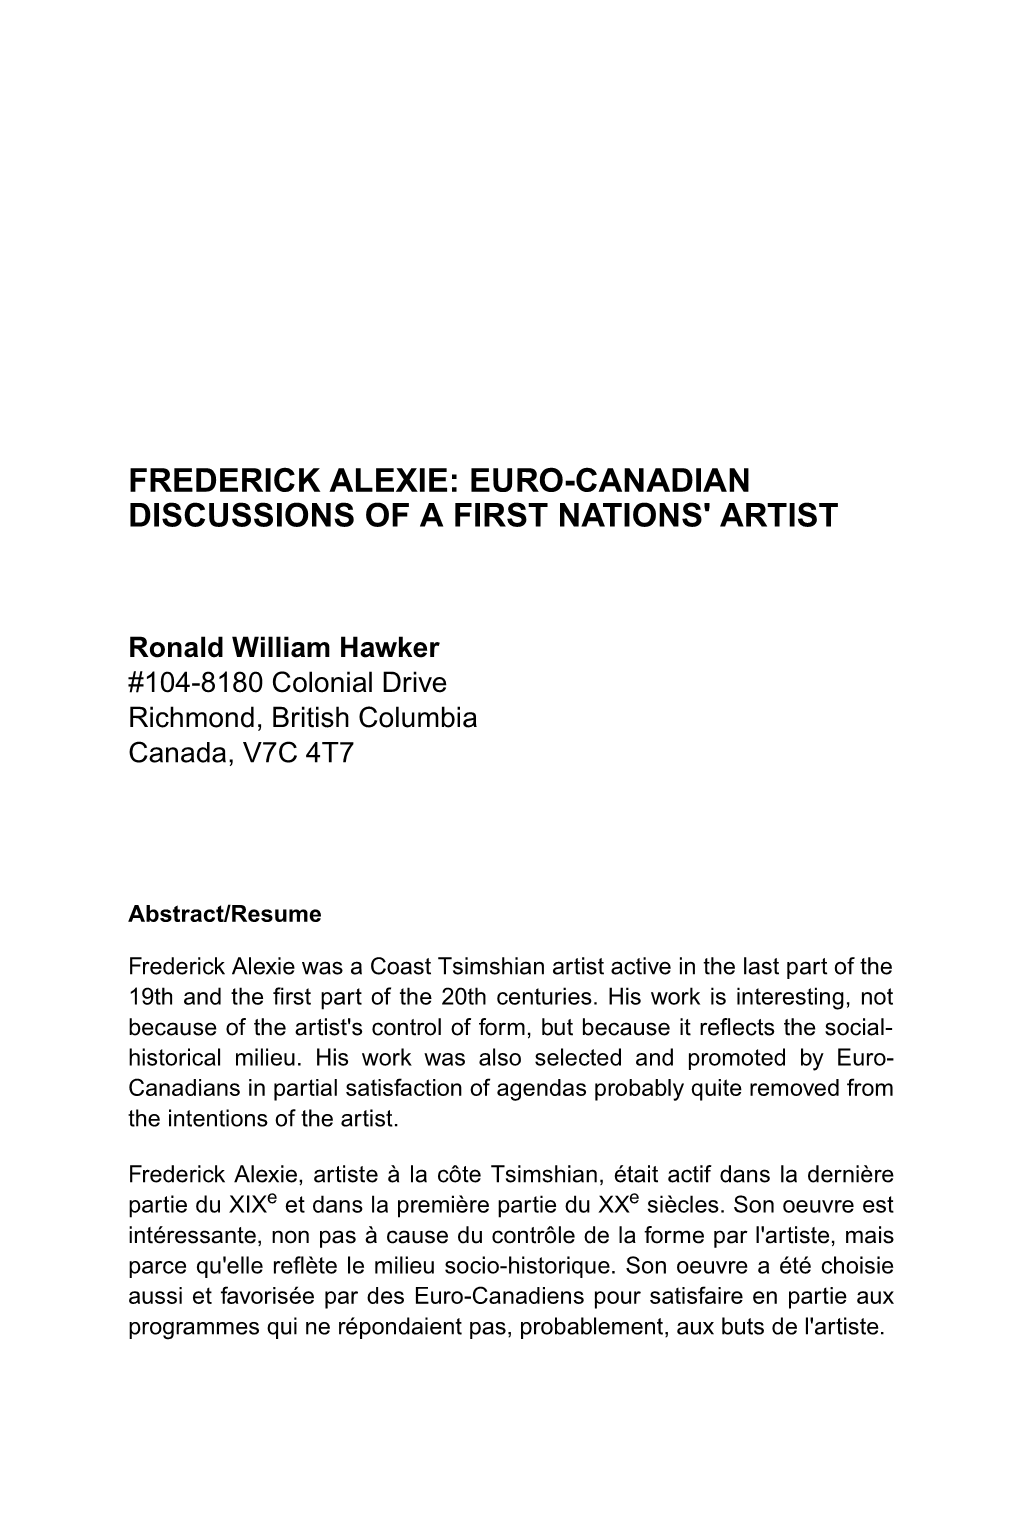 Euro-Canadian Discussions of a First Nations' Artist